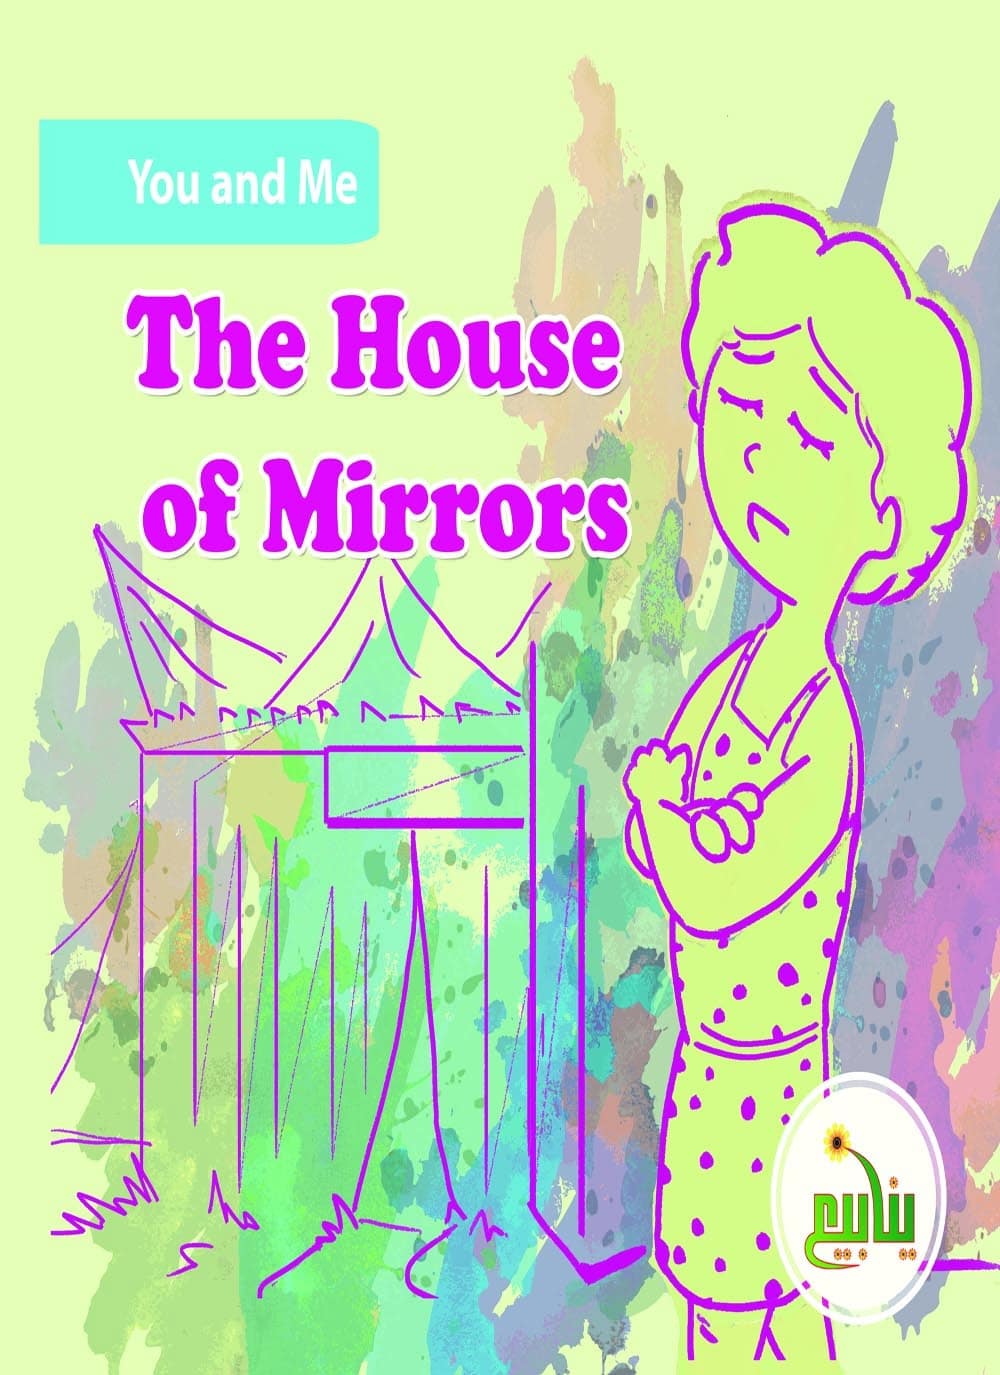 The House of mirrors